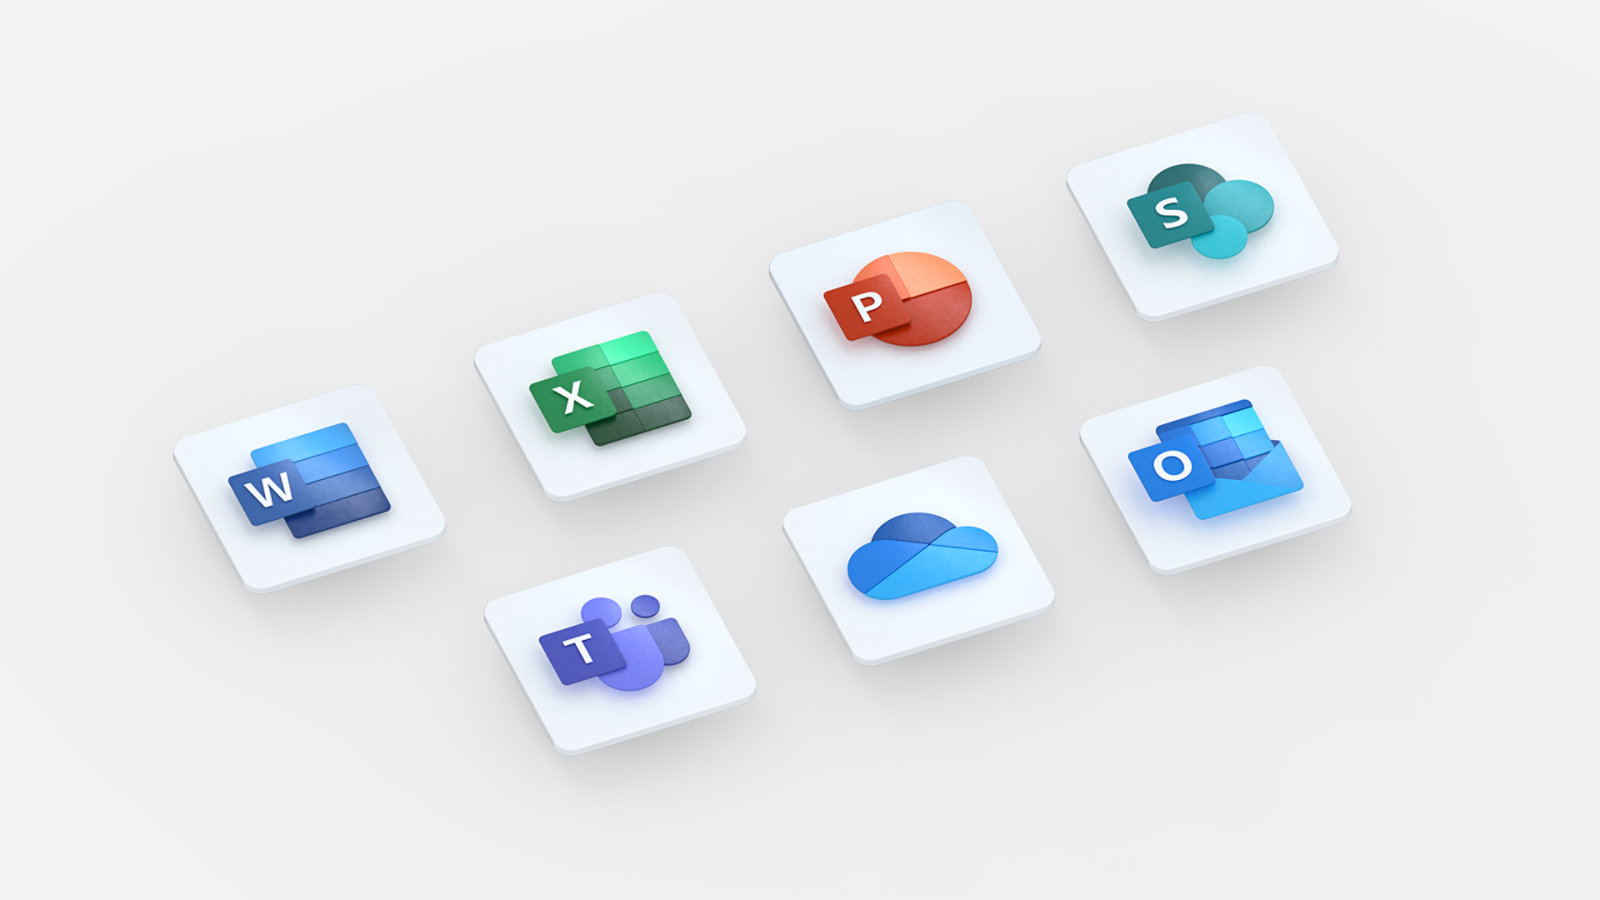 App icons for apps that are included in Microsoft 365 Business plans, including Word, Excel, PowerPoint, SharePoint, Teams, OneDrive, Outlook, and more.